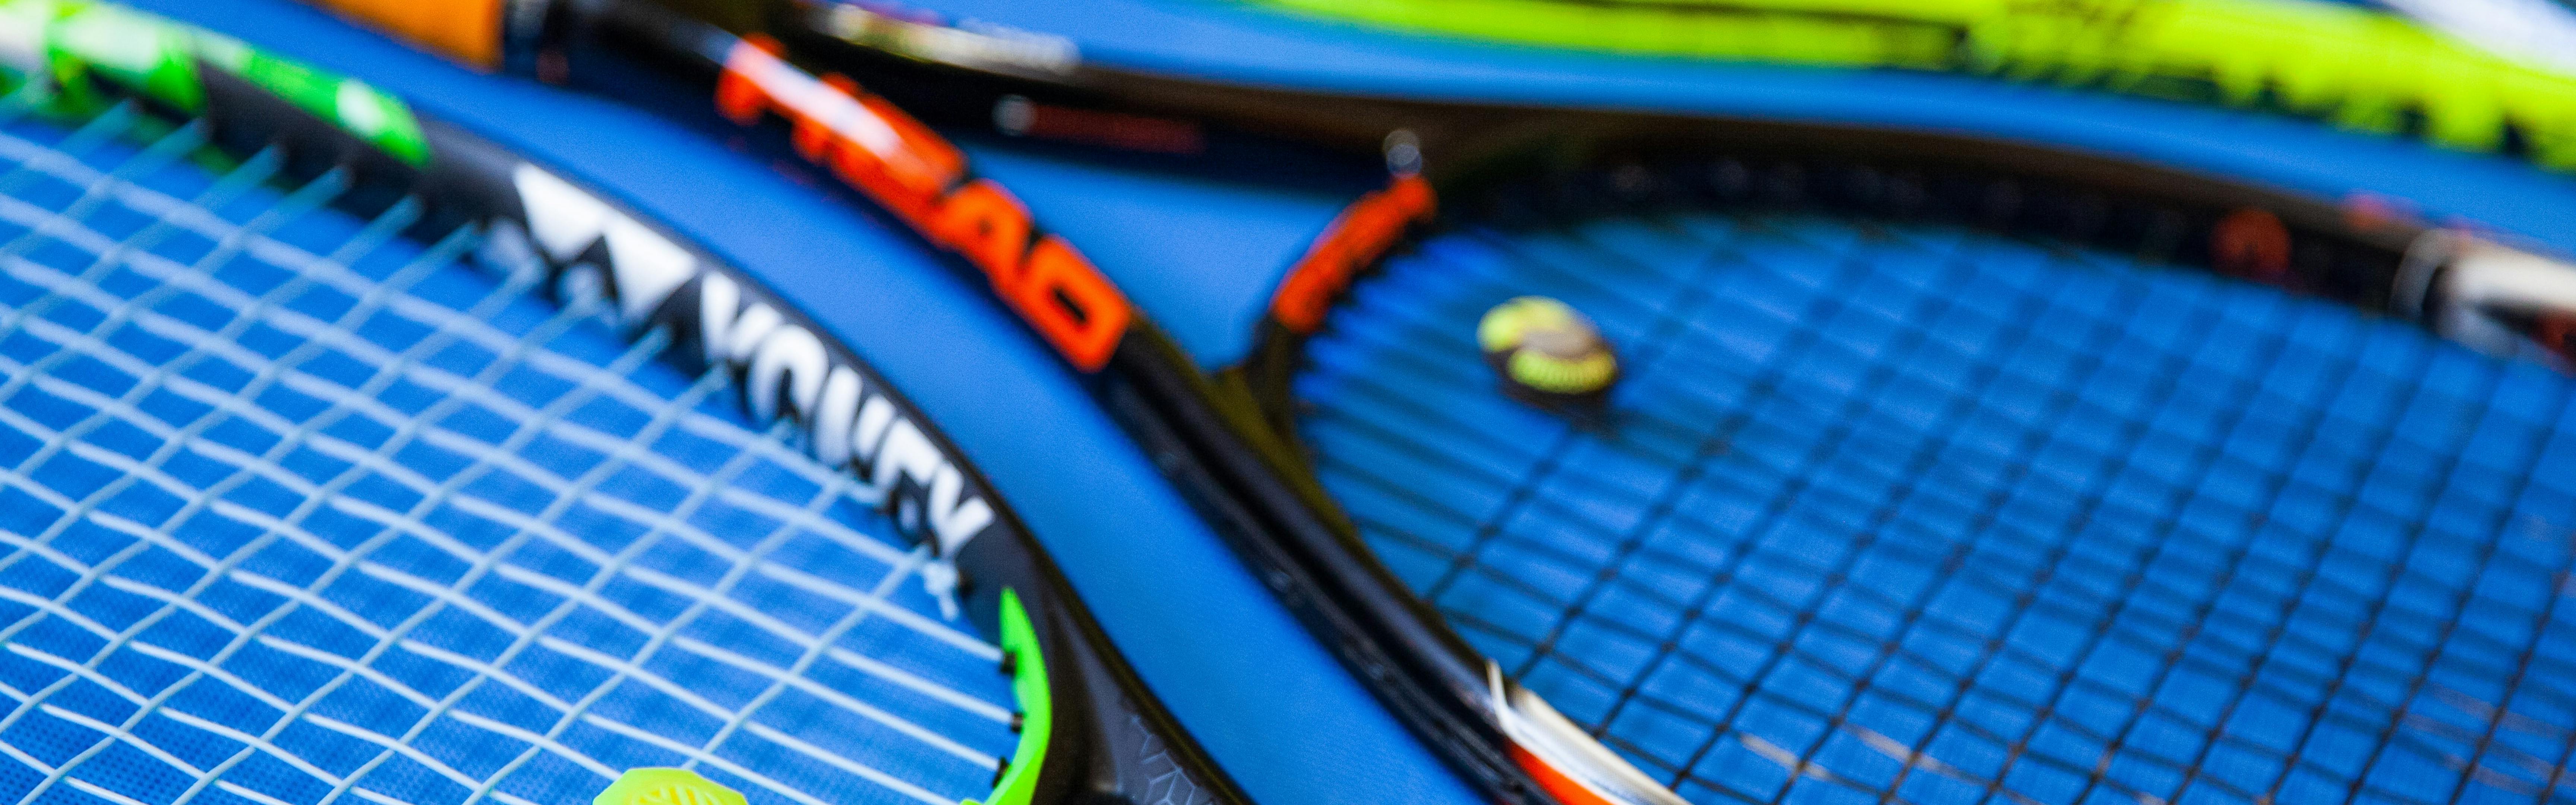 Several tennis racquets in a row.